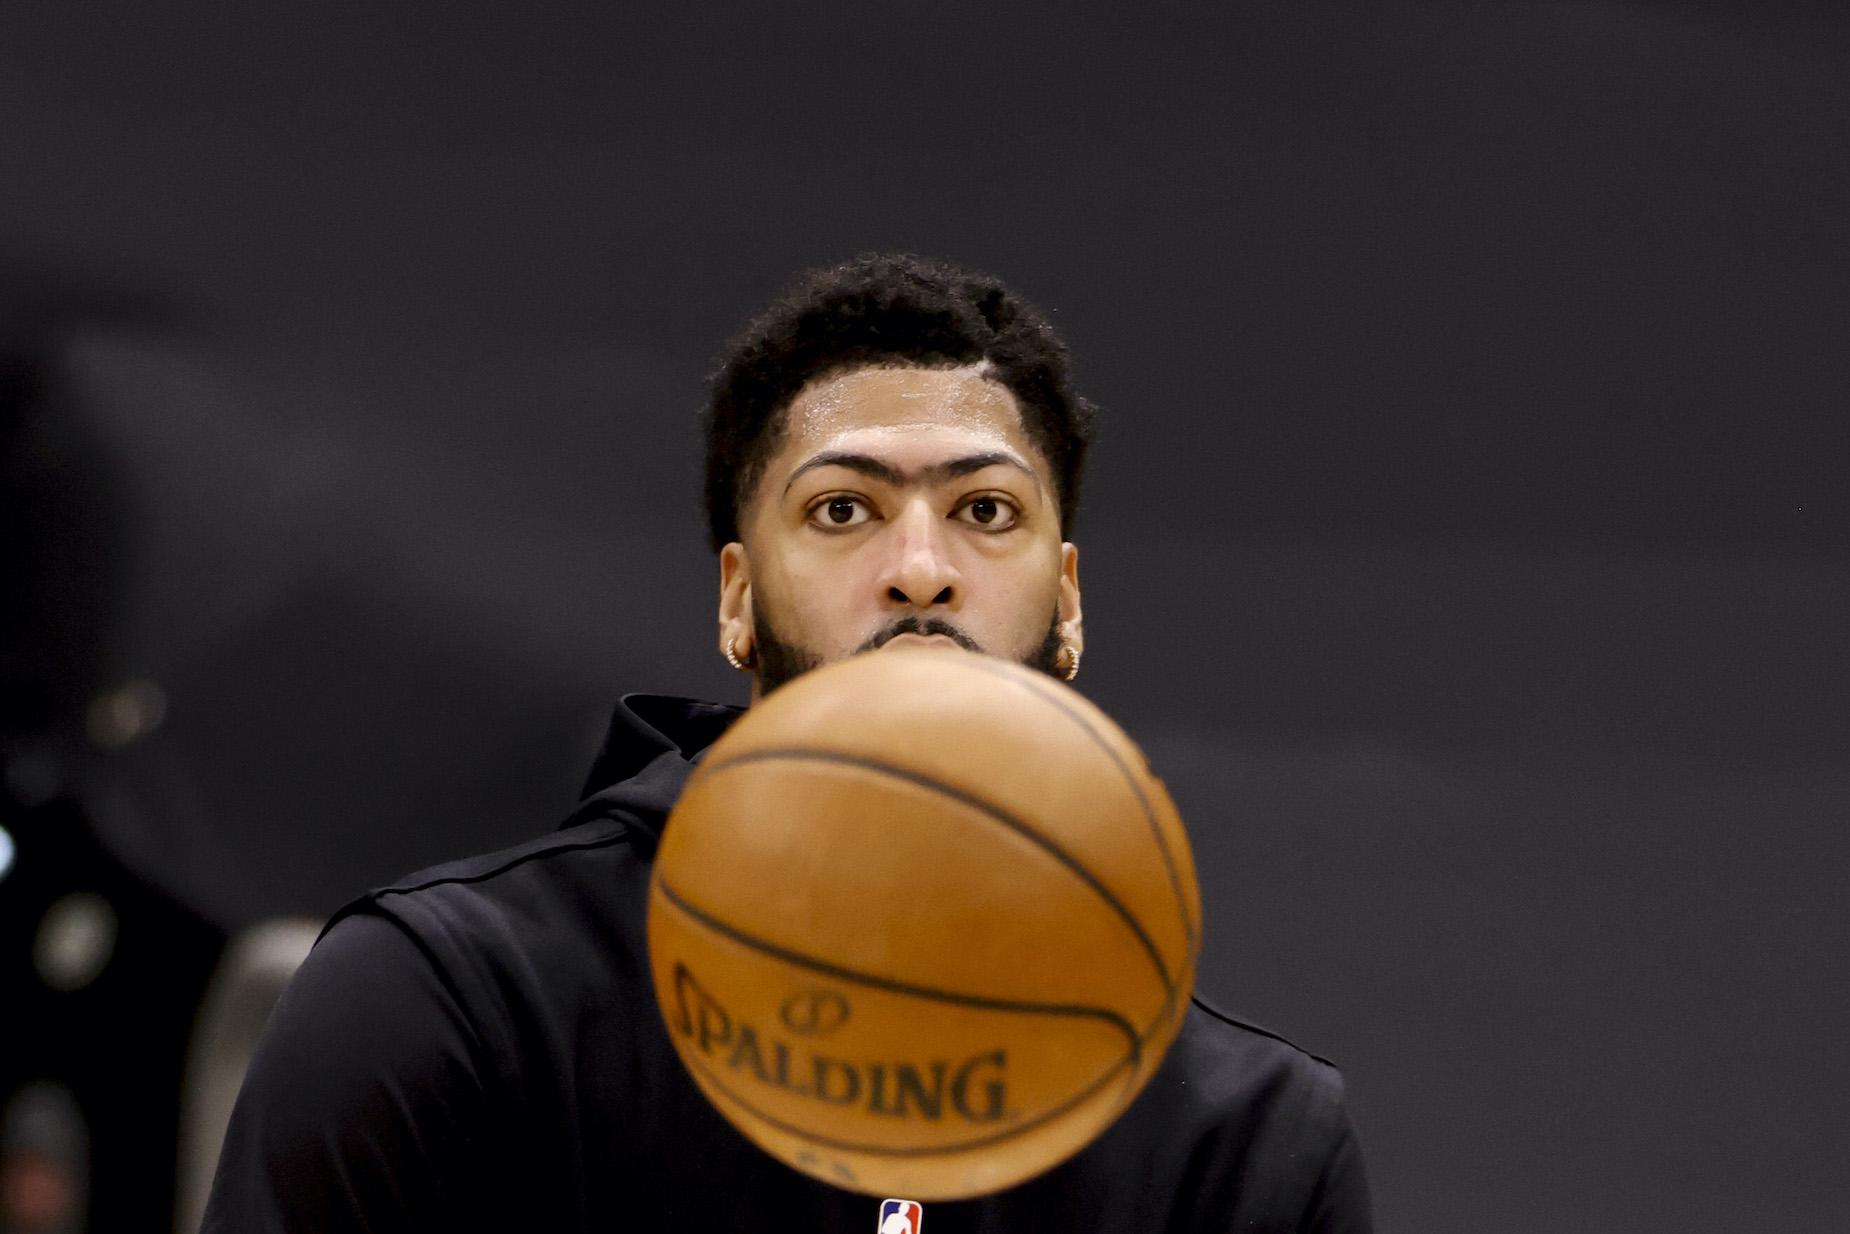 Lakers big man Anthony Davis on the court ahead of a game in April 2021.